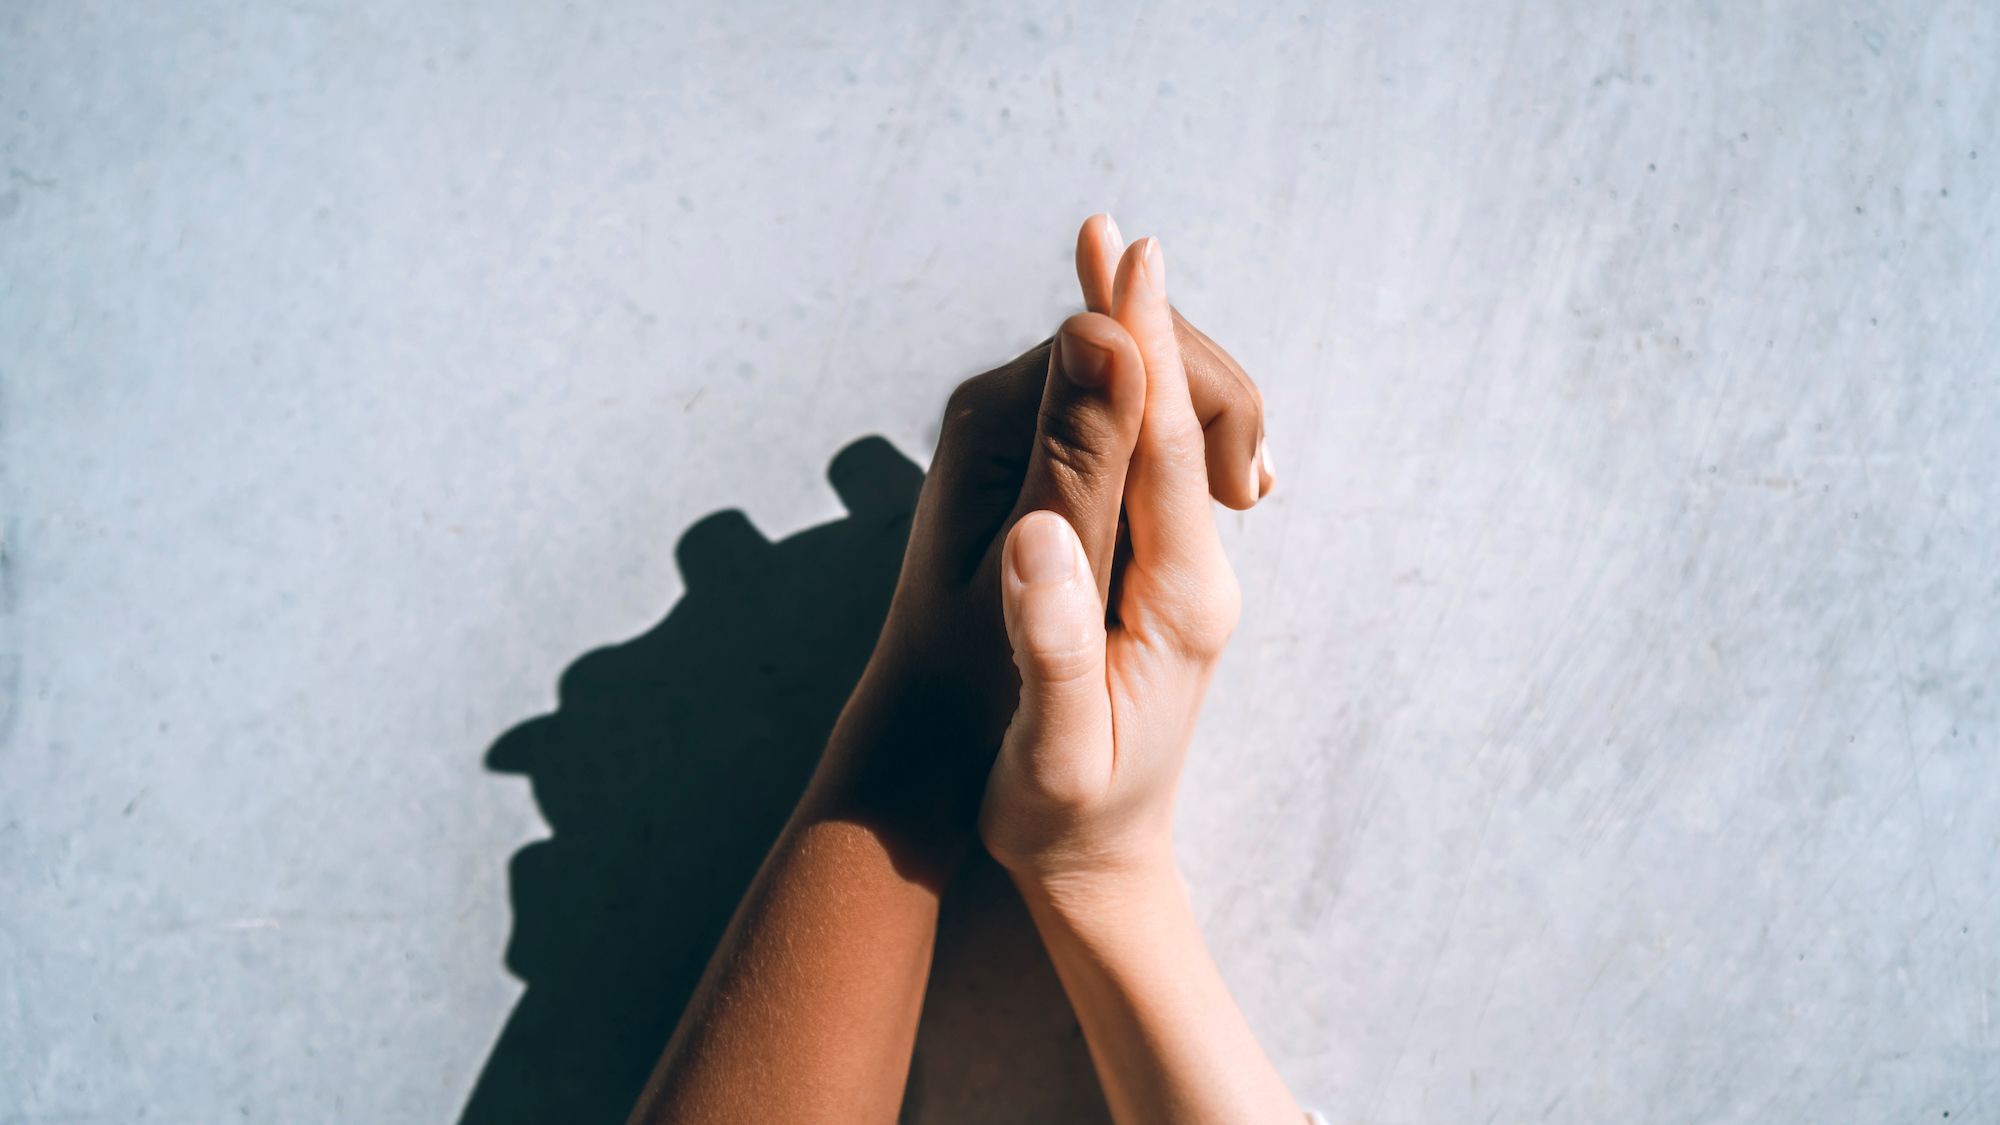 Two multiracial women holding hands against a concrete gray wall, white and black skin tones. Symbol of international couples. Gender, age, and nationality equality, individuality and diversity concepts. LGBT relationships